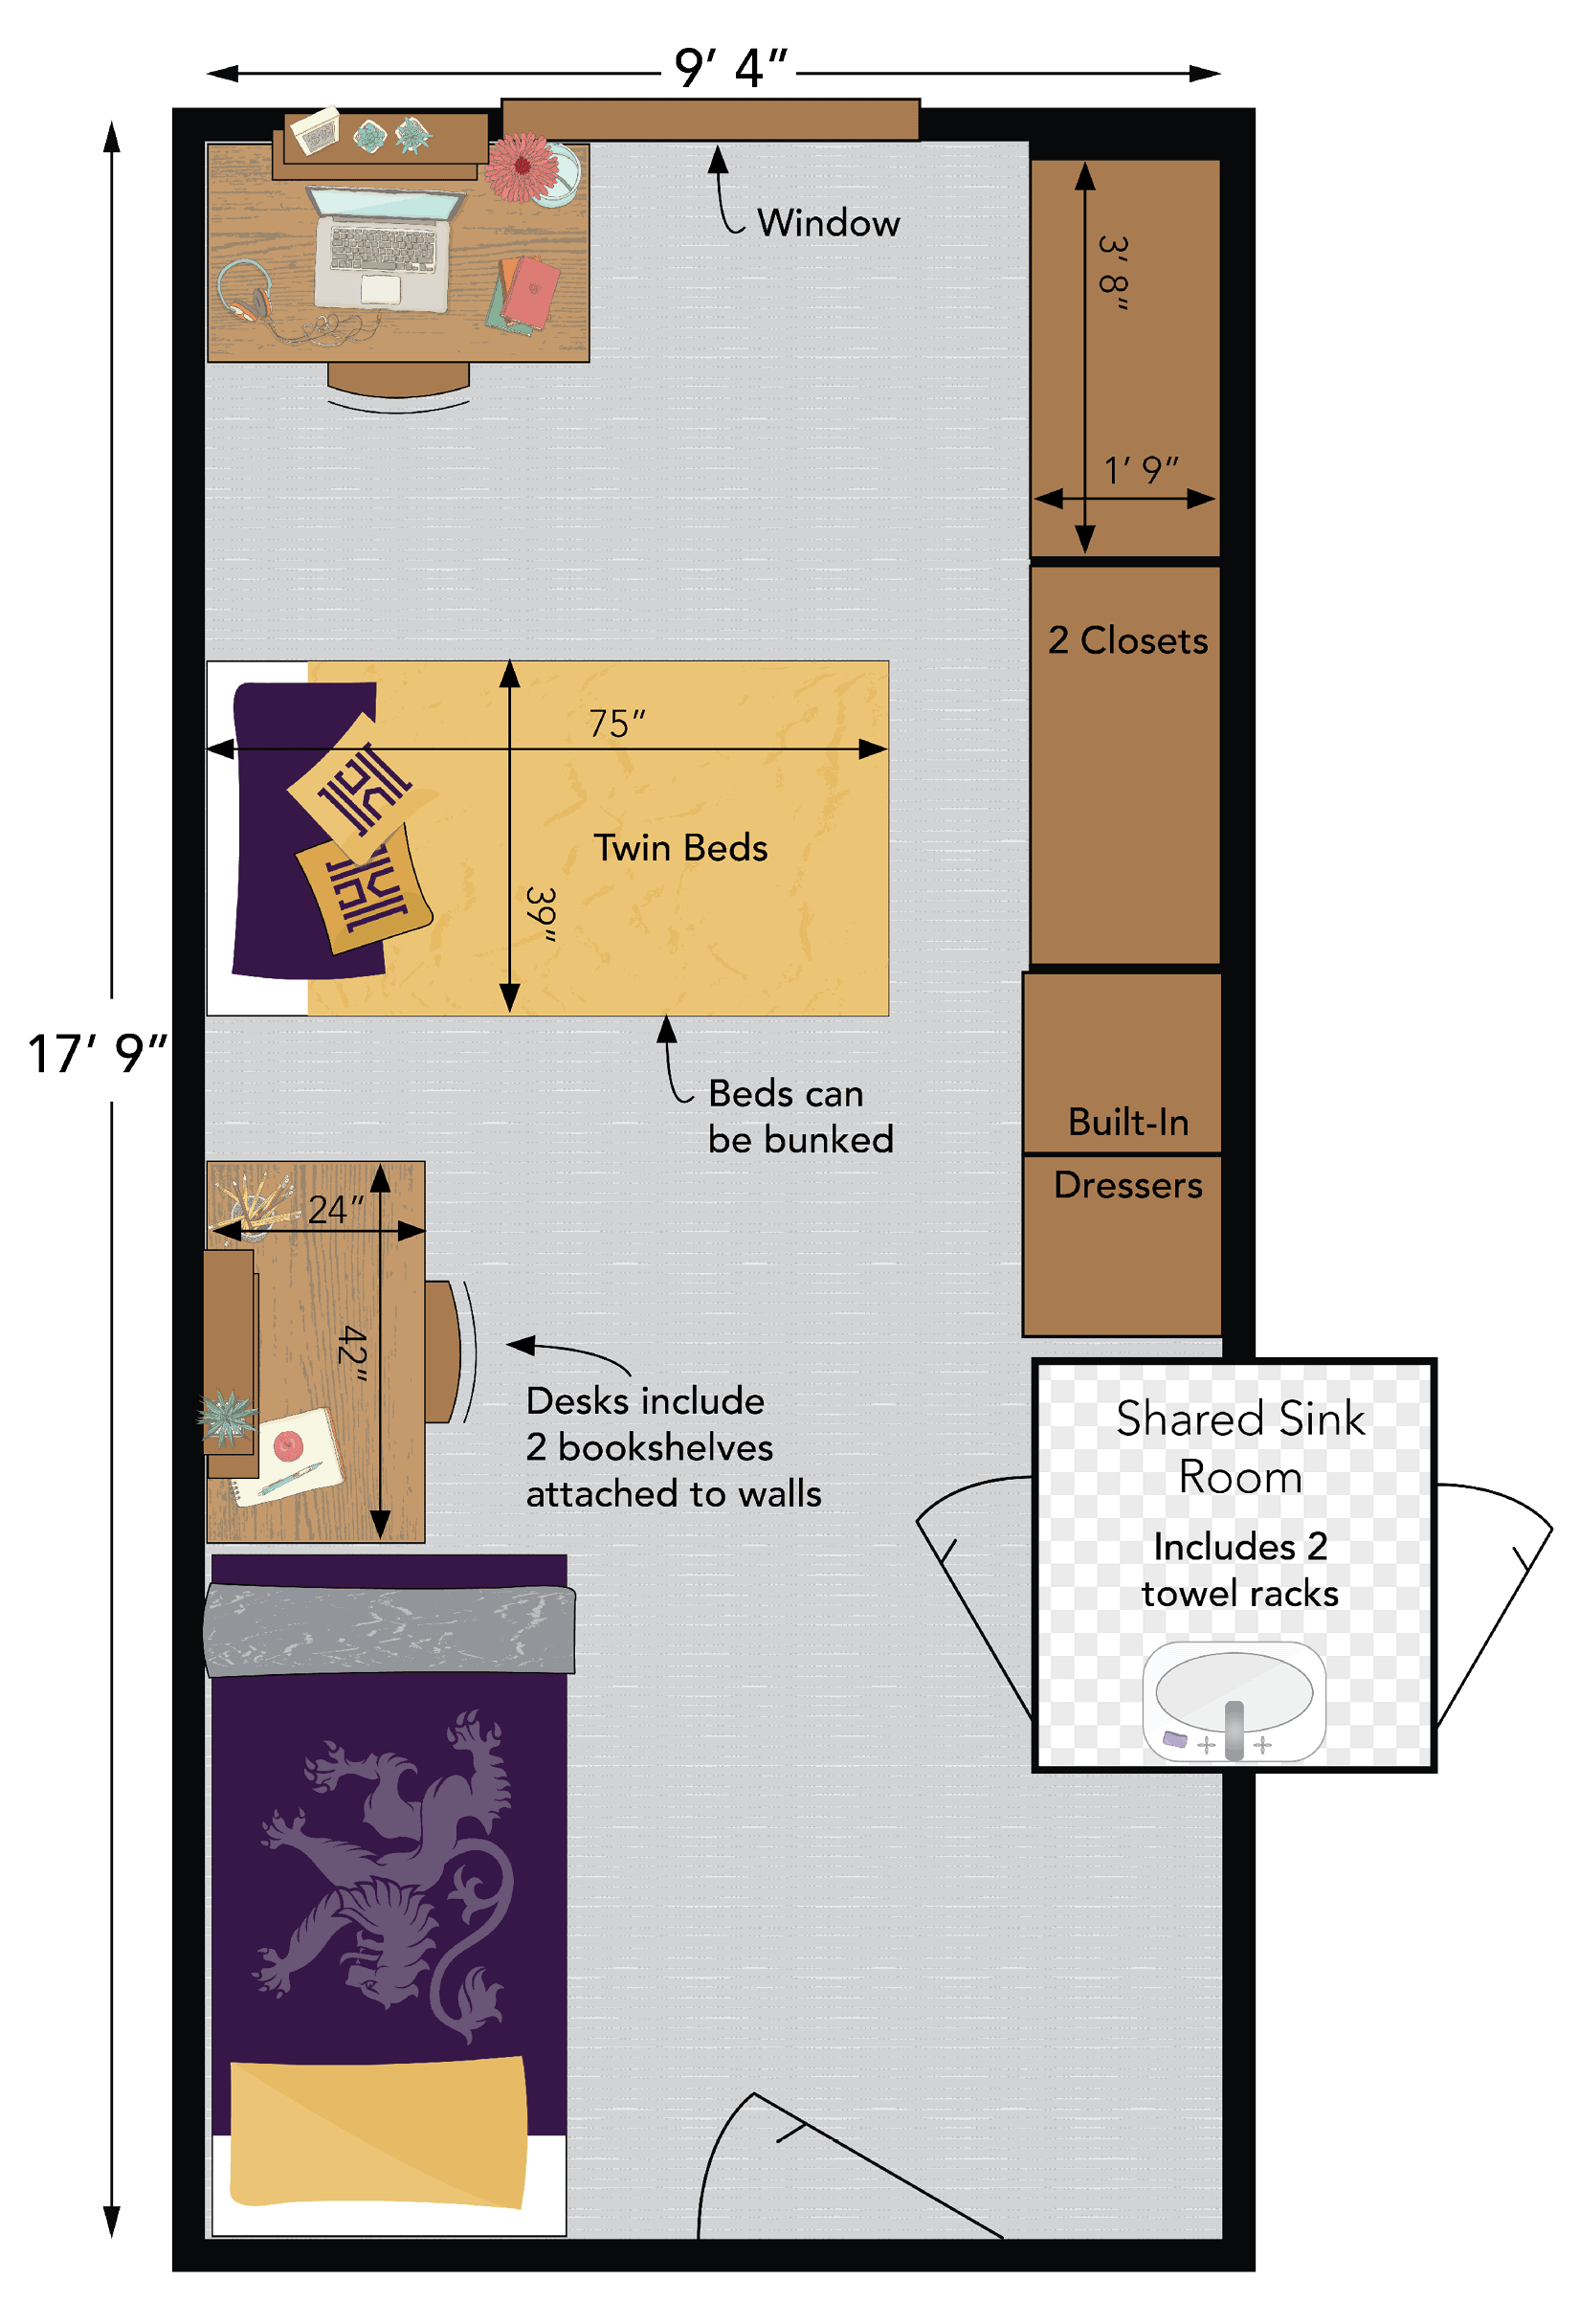 Diagram of the interior of a room at Lambein Hall at Houghton.